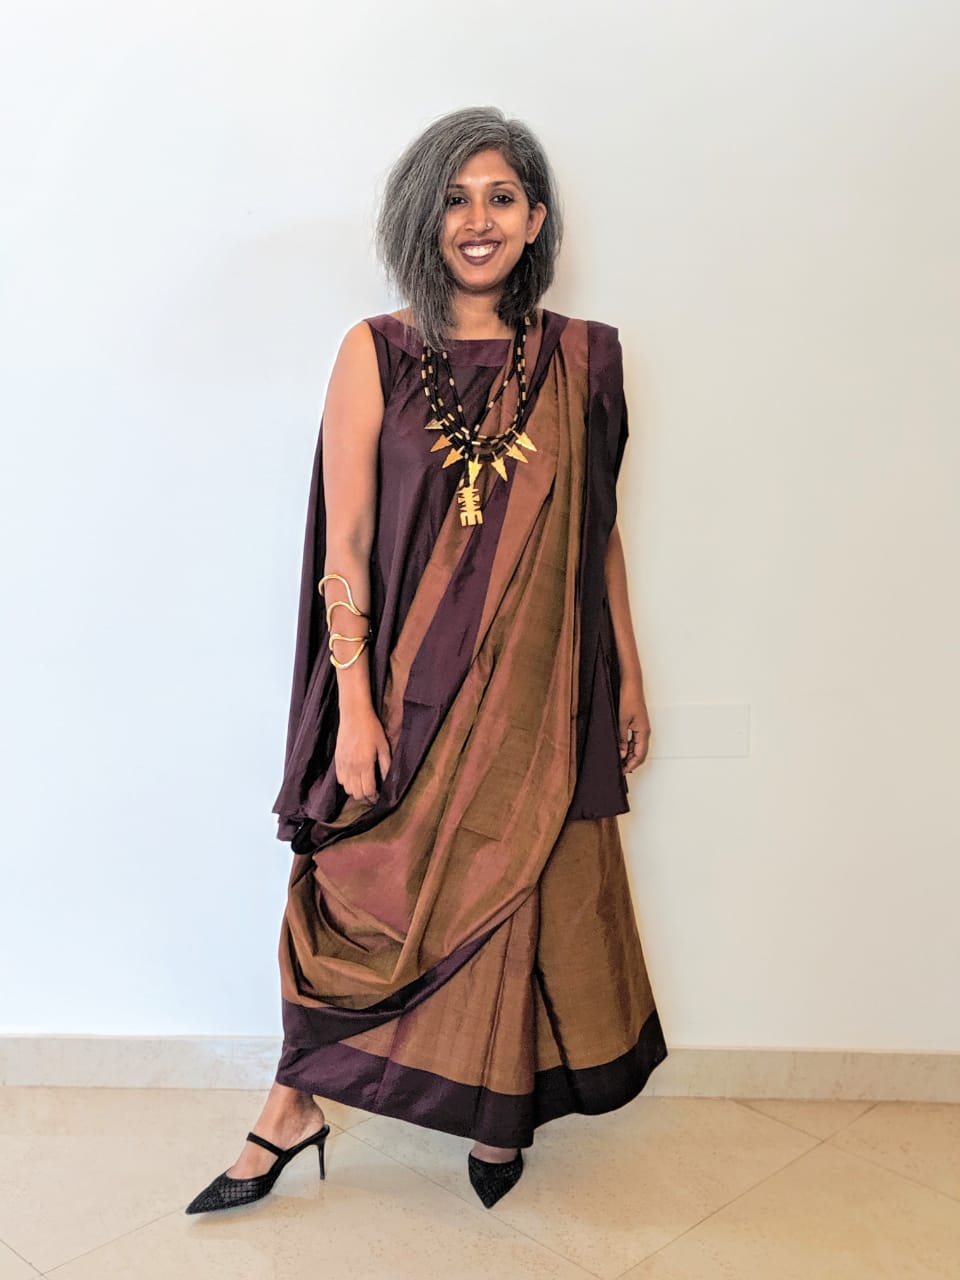 Saree Draping Styles as 'Traditional Cultural Expressions' (TCEs) – SpicyIP